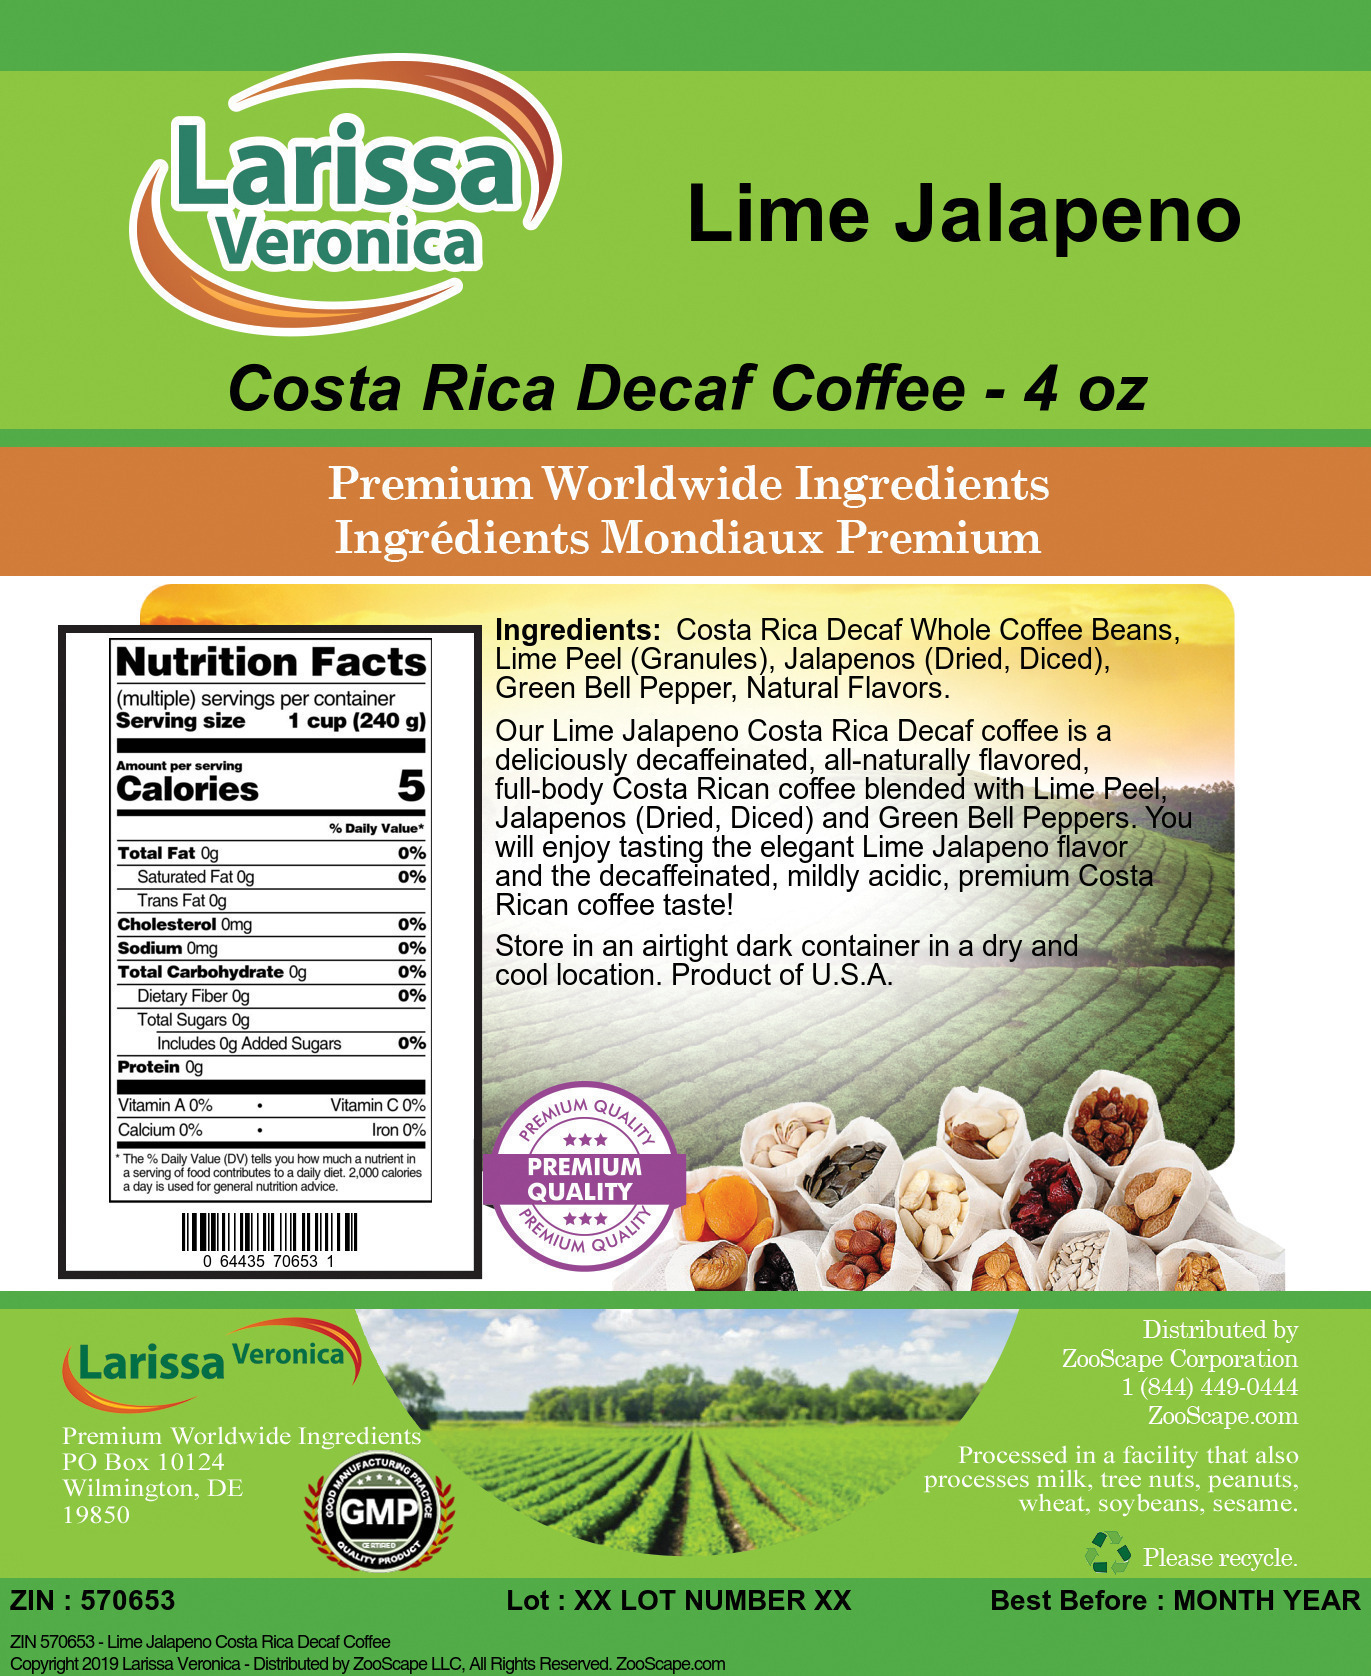 Lime Jalapeno Costa Rica Decaf Coffee - Label